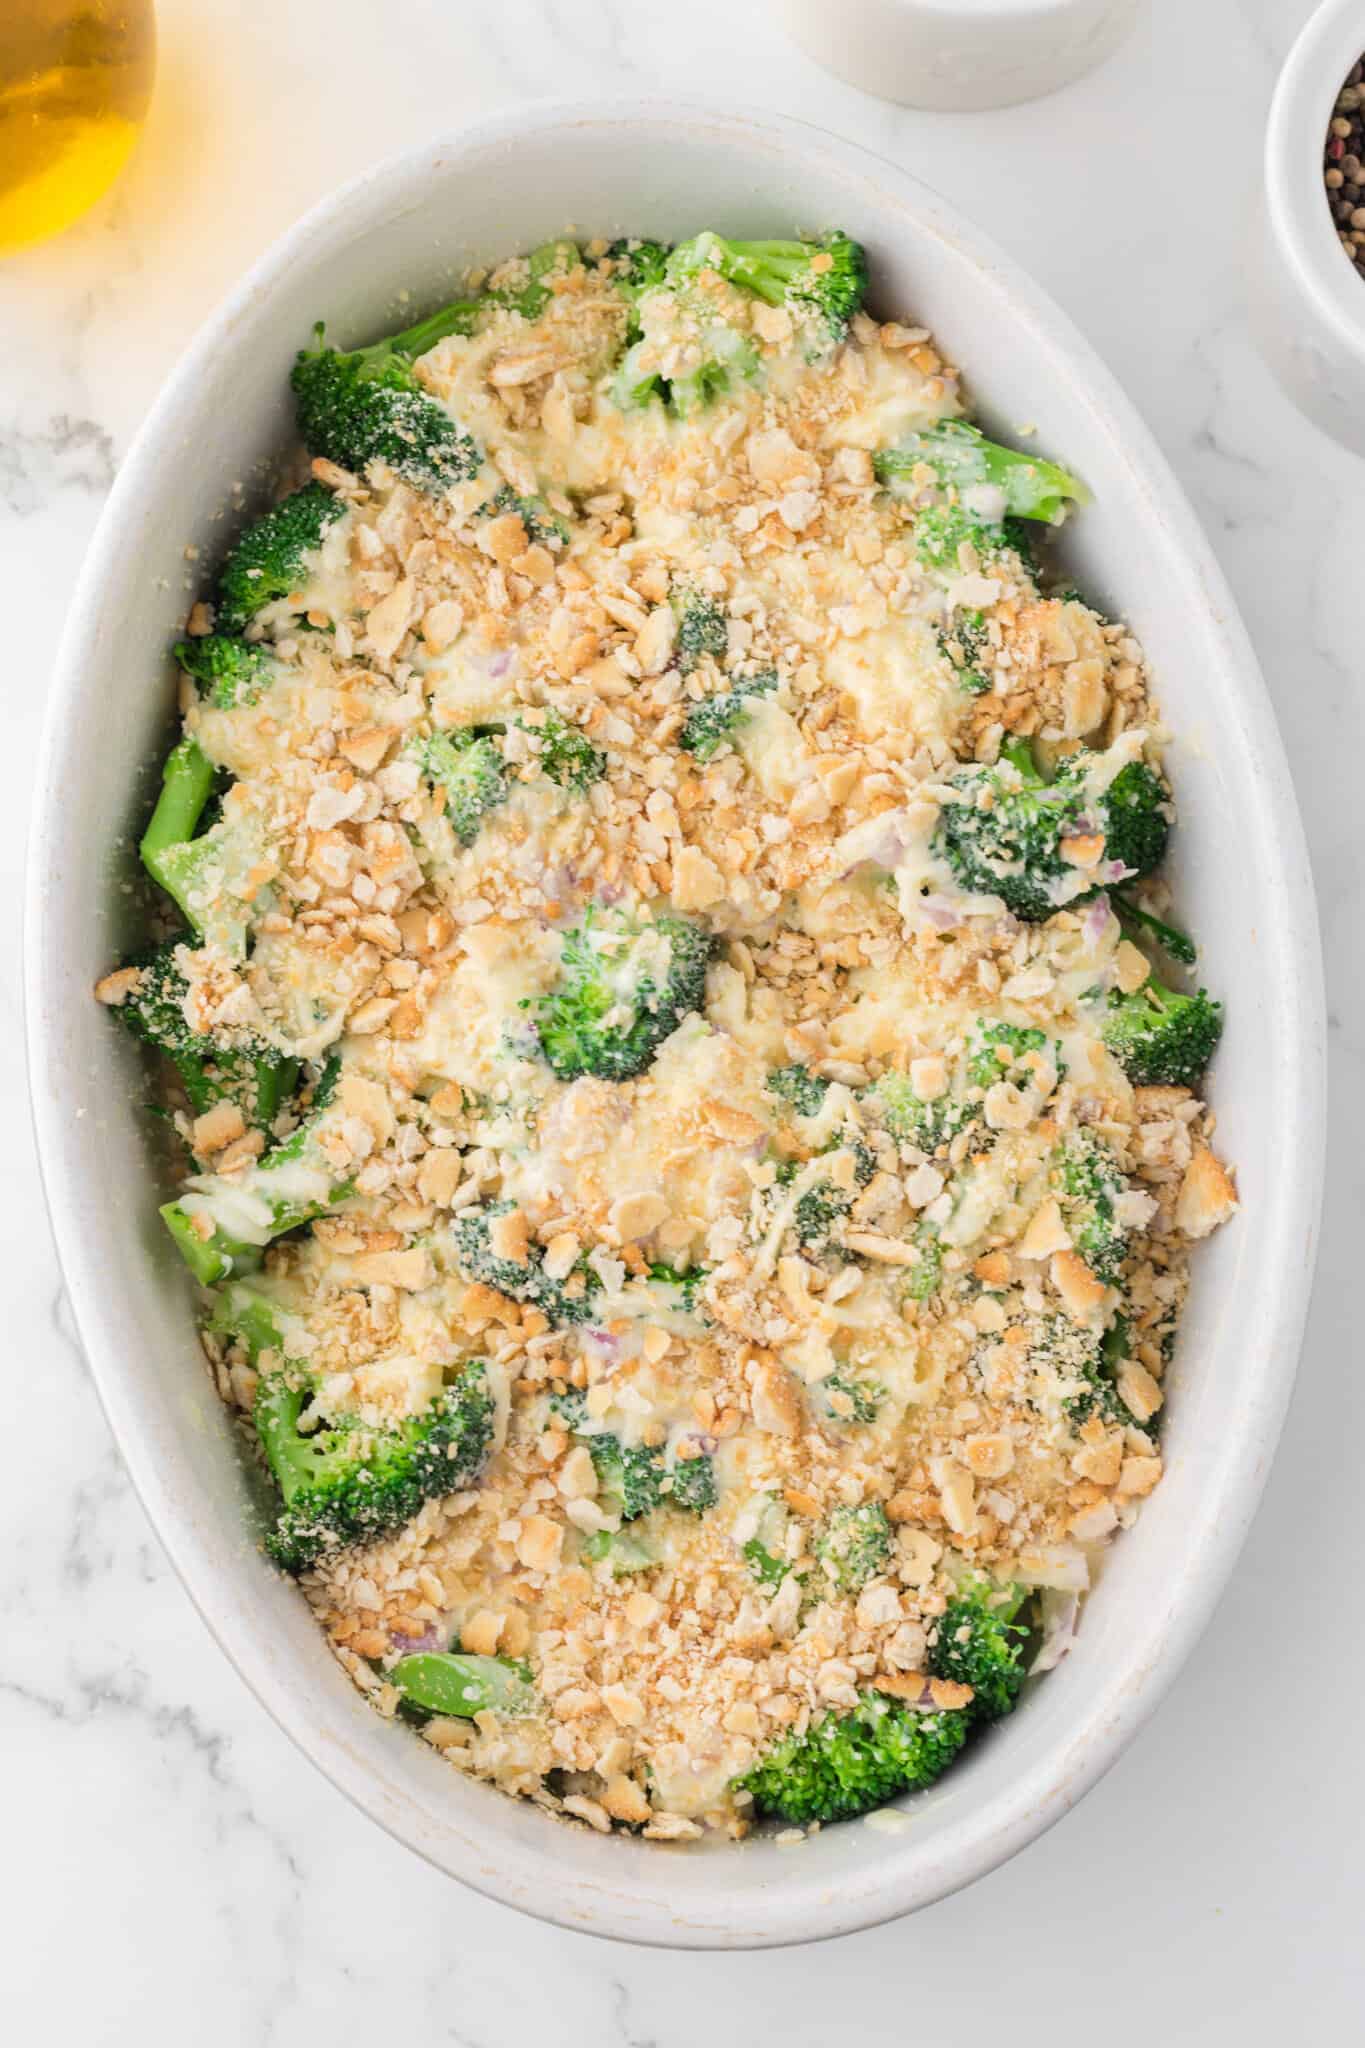 crushed Ritz crackers on top of creamy broccoli mixture in a baking dish